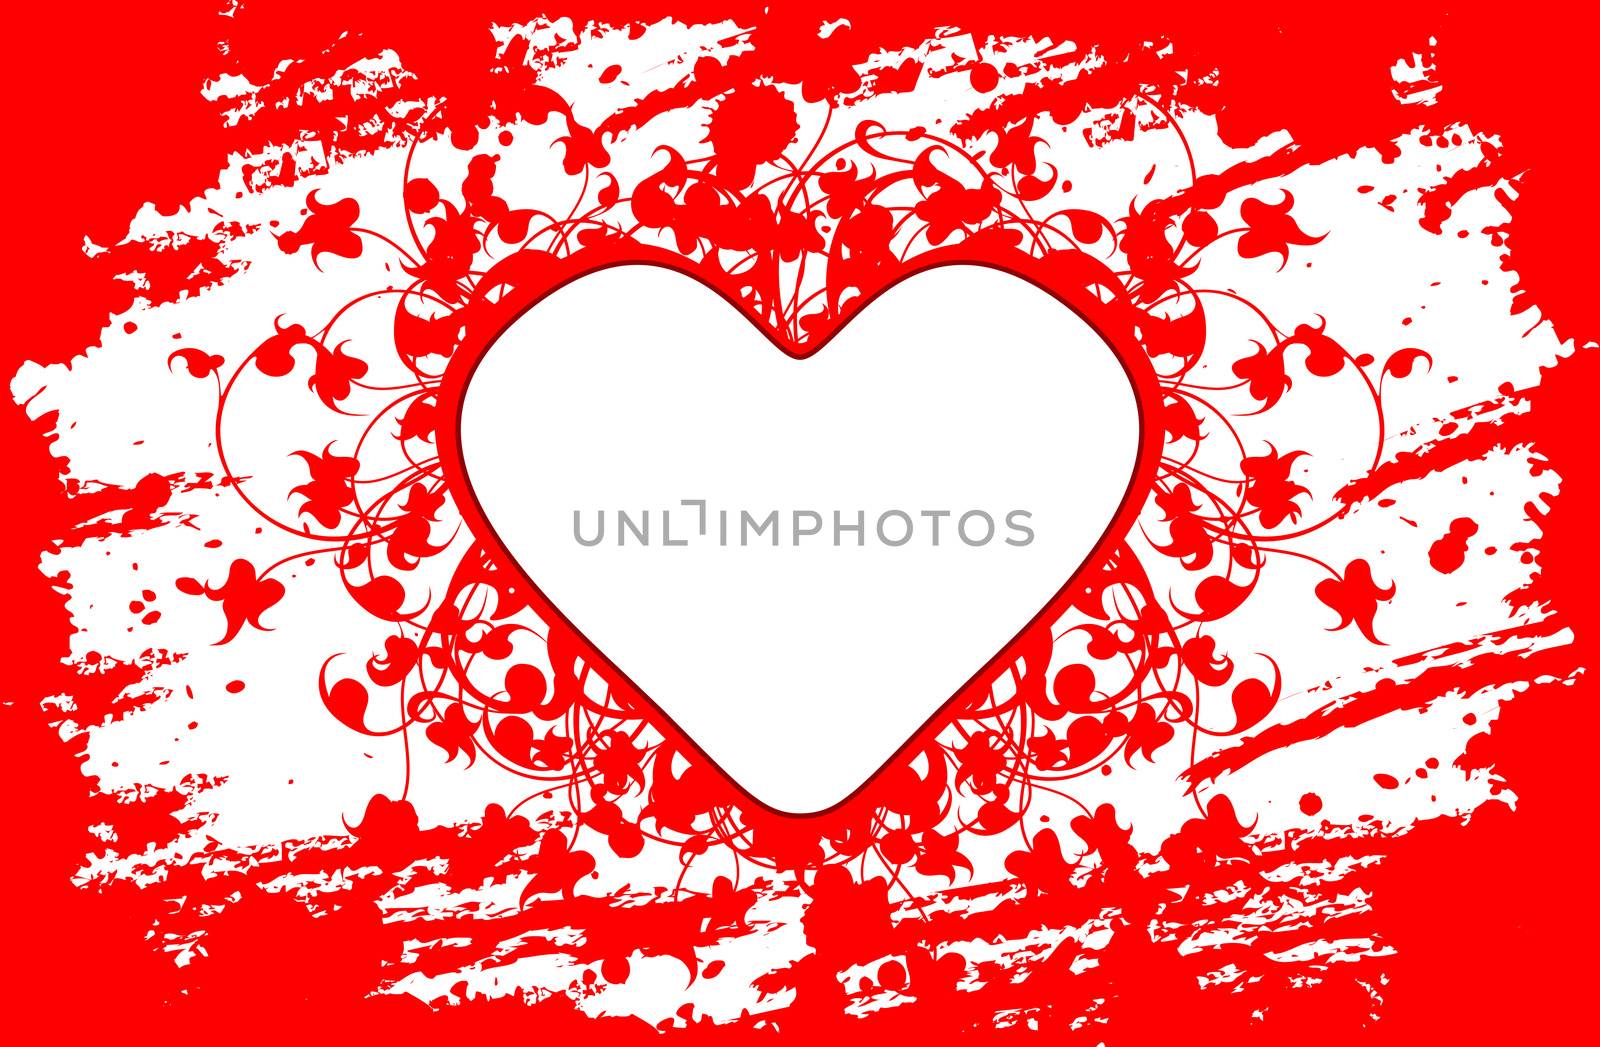 Valentine's Day greeting card with flowers heart on grunge background